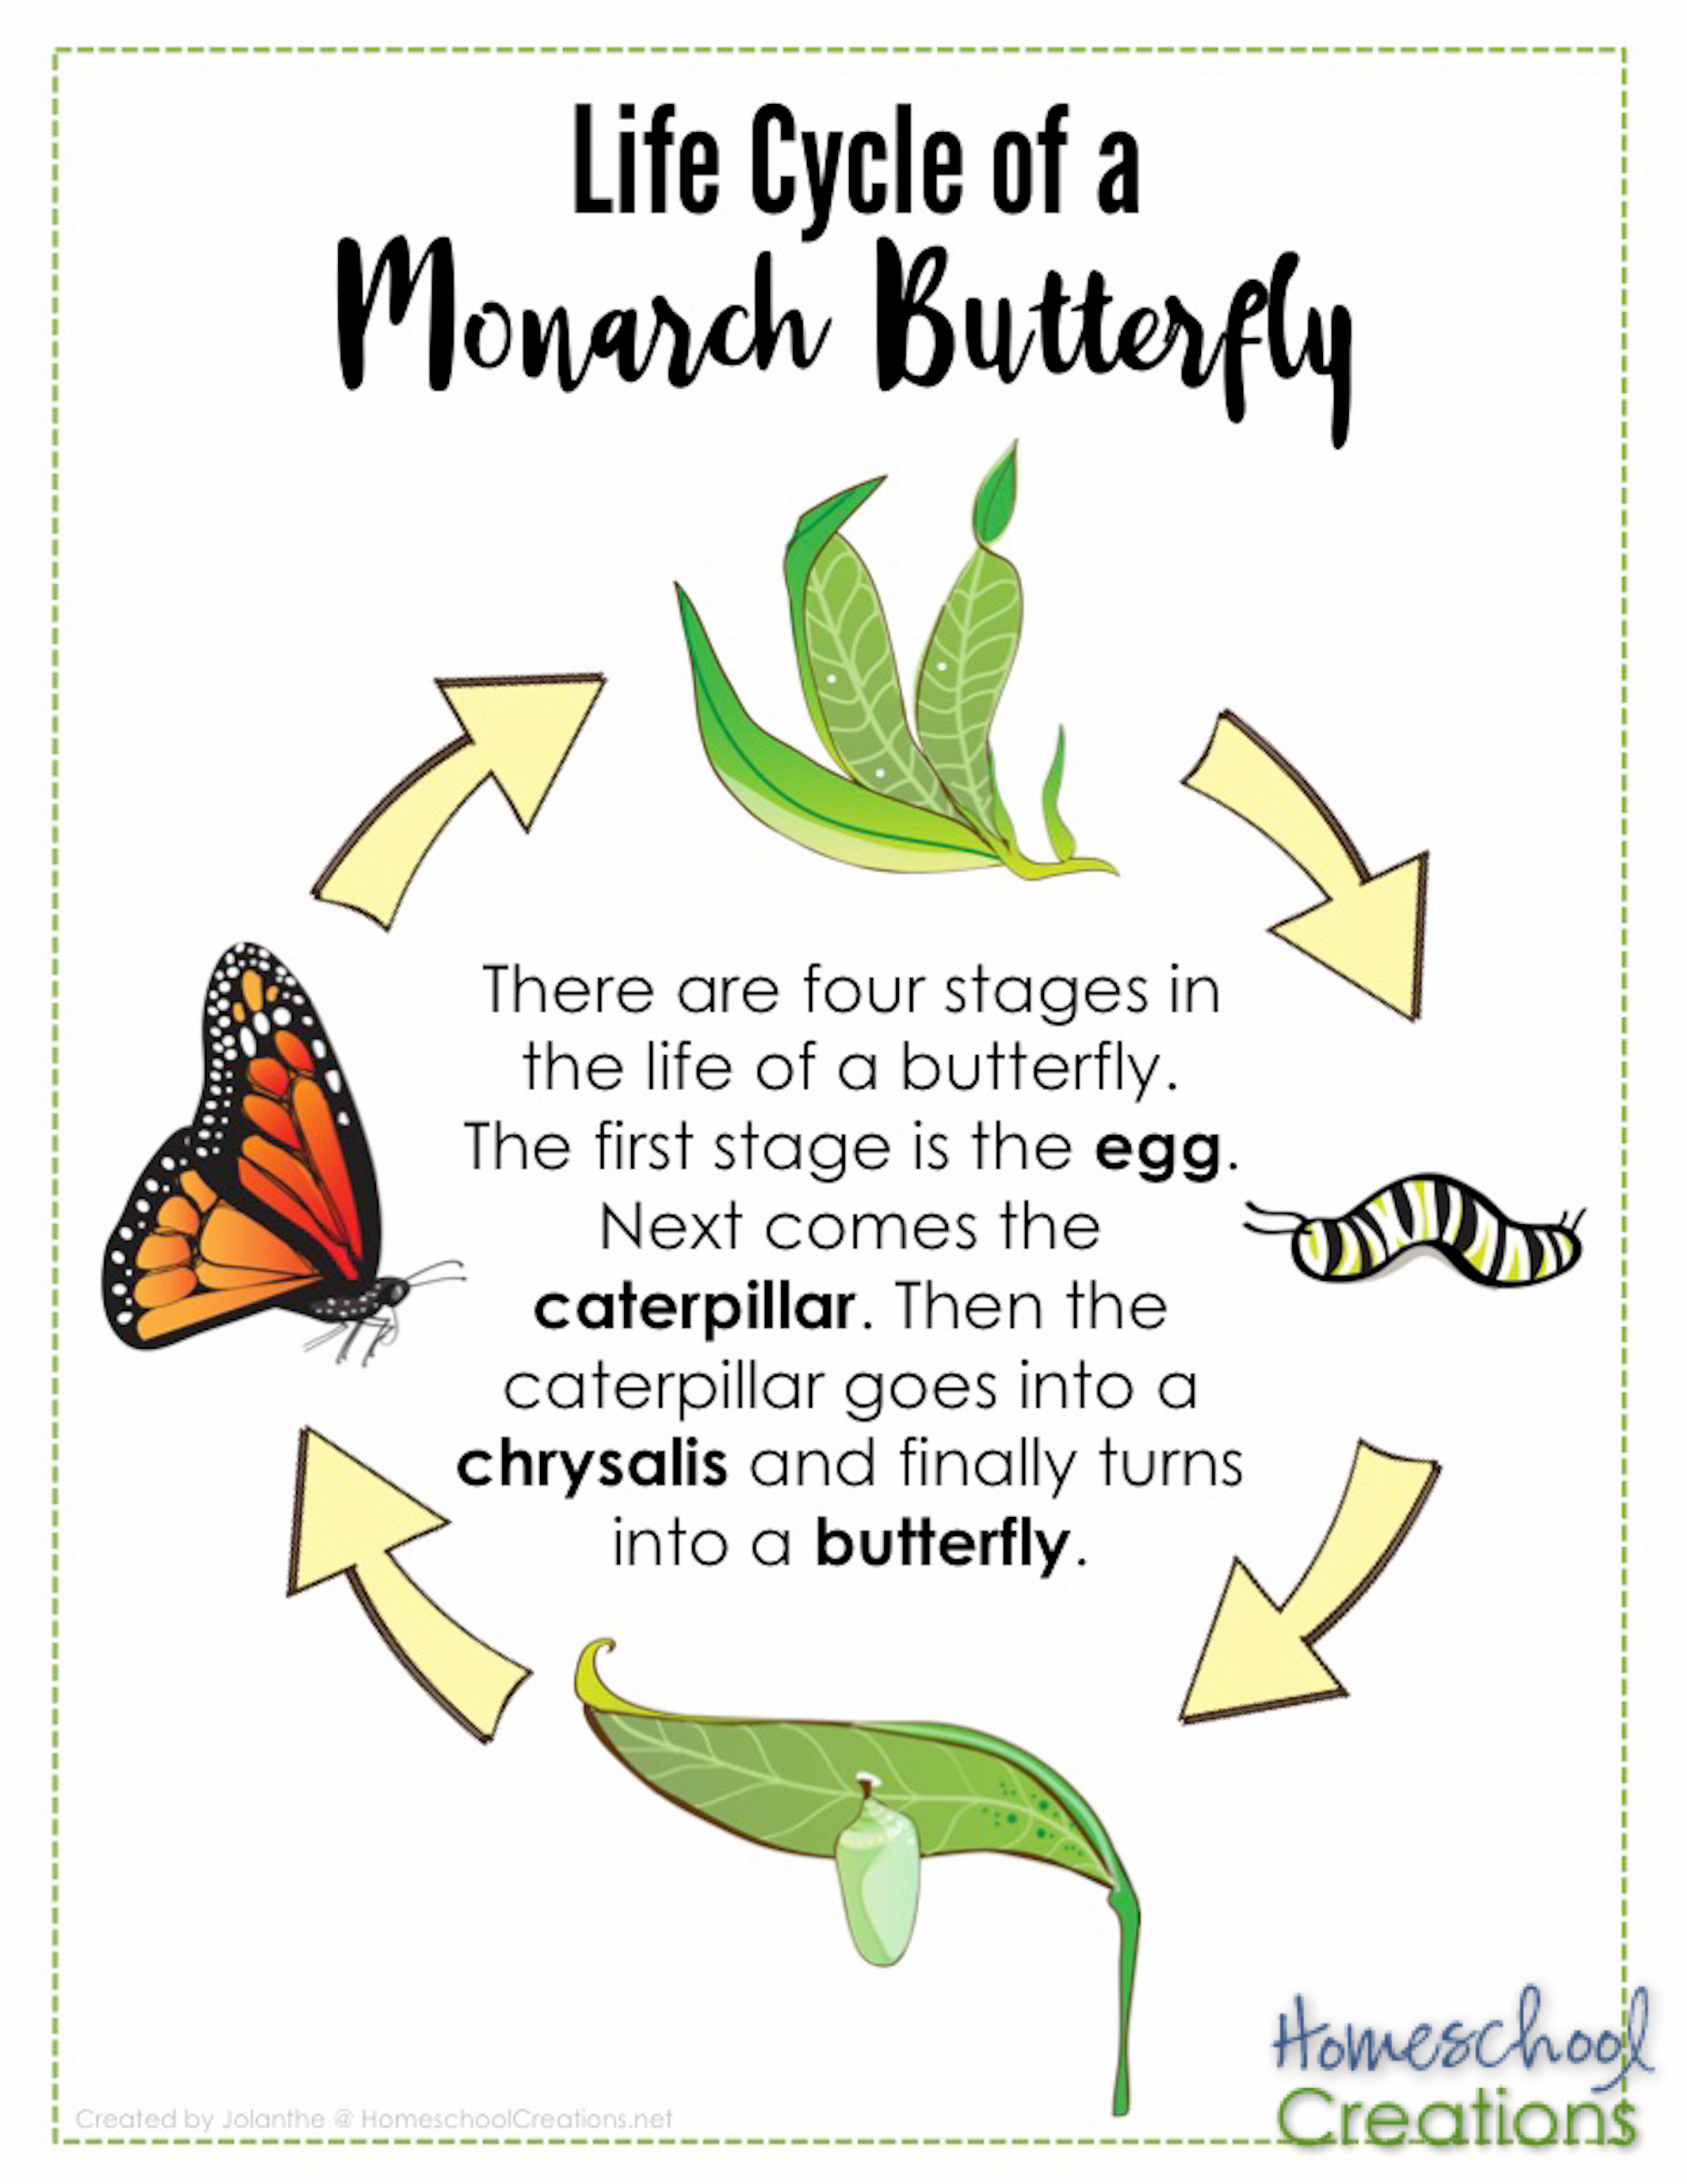 life cycle of monarch butterfly poster HomeschoolCreations.net